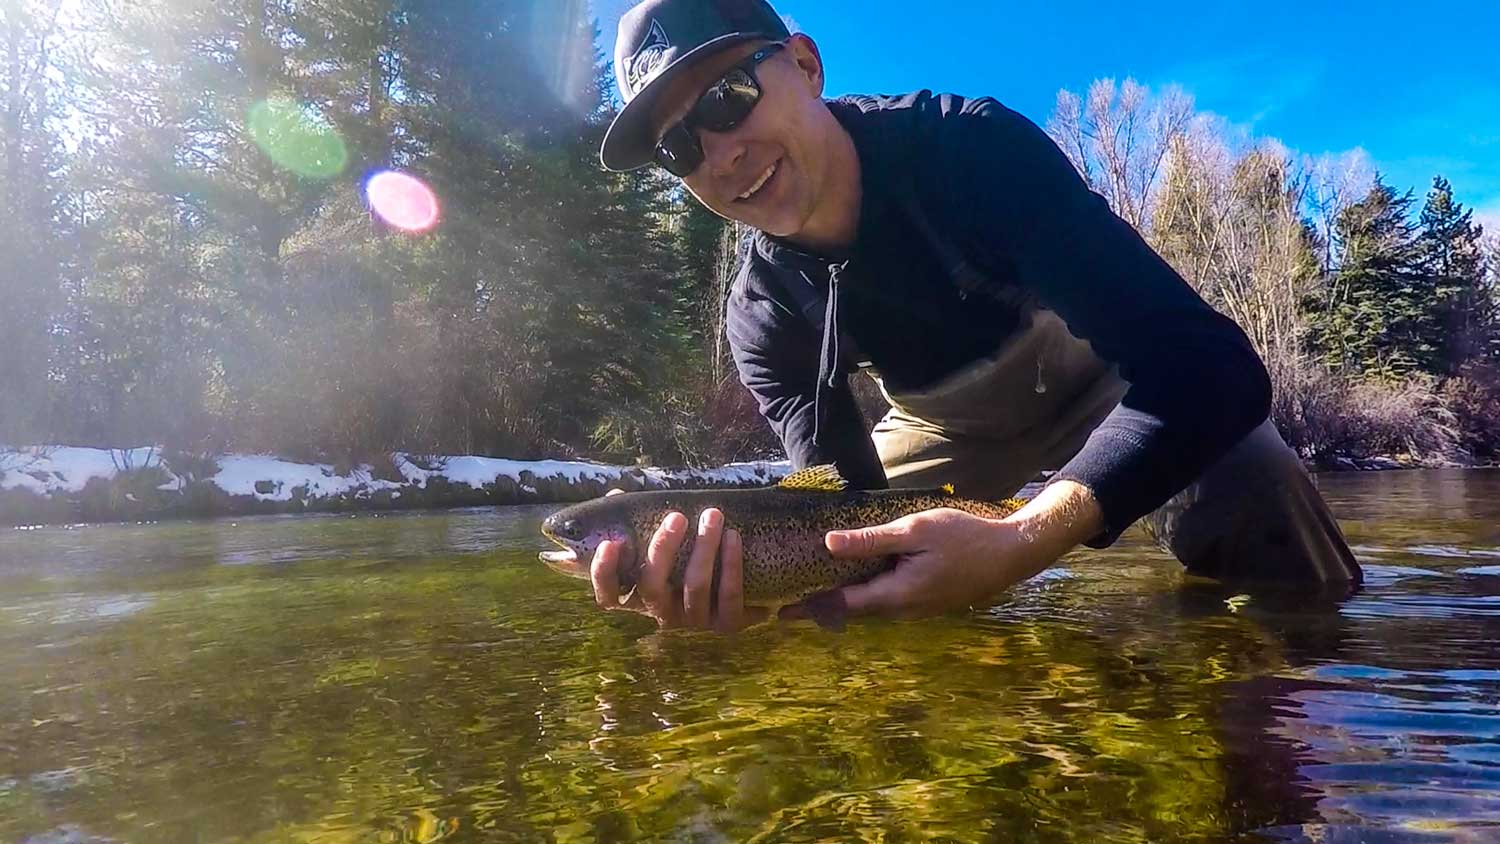 Why Is Fly Fishing Called Fly Fishing?